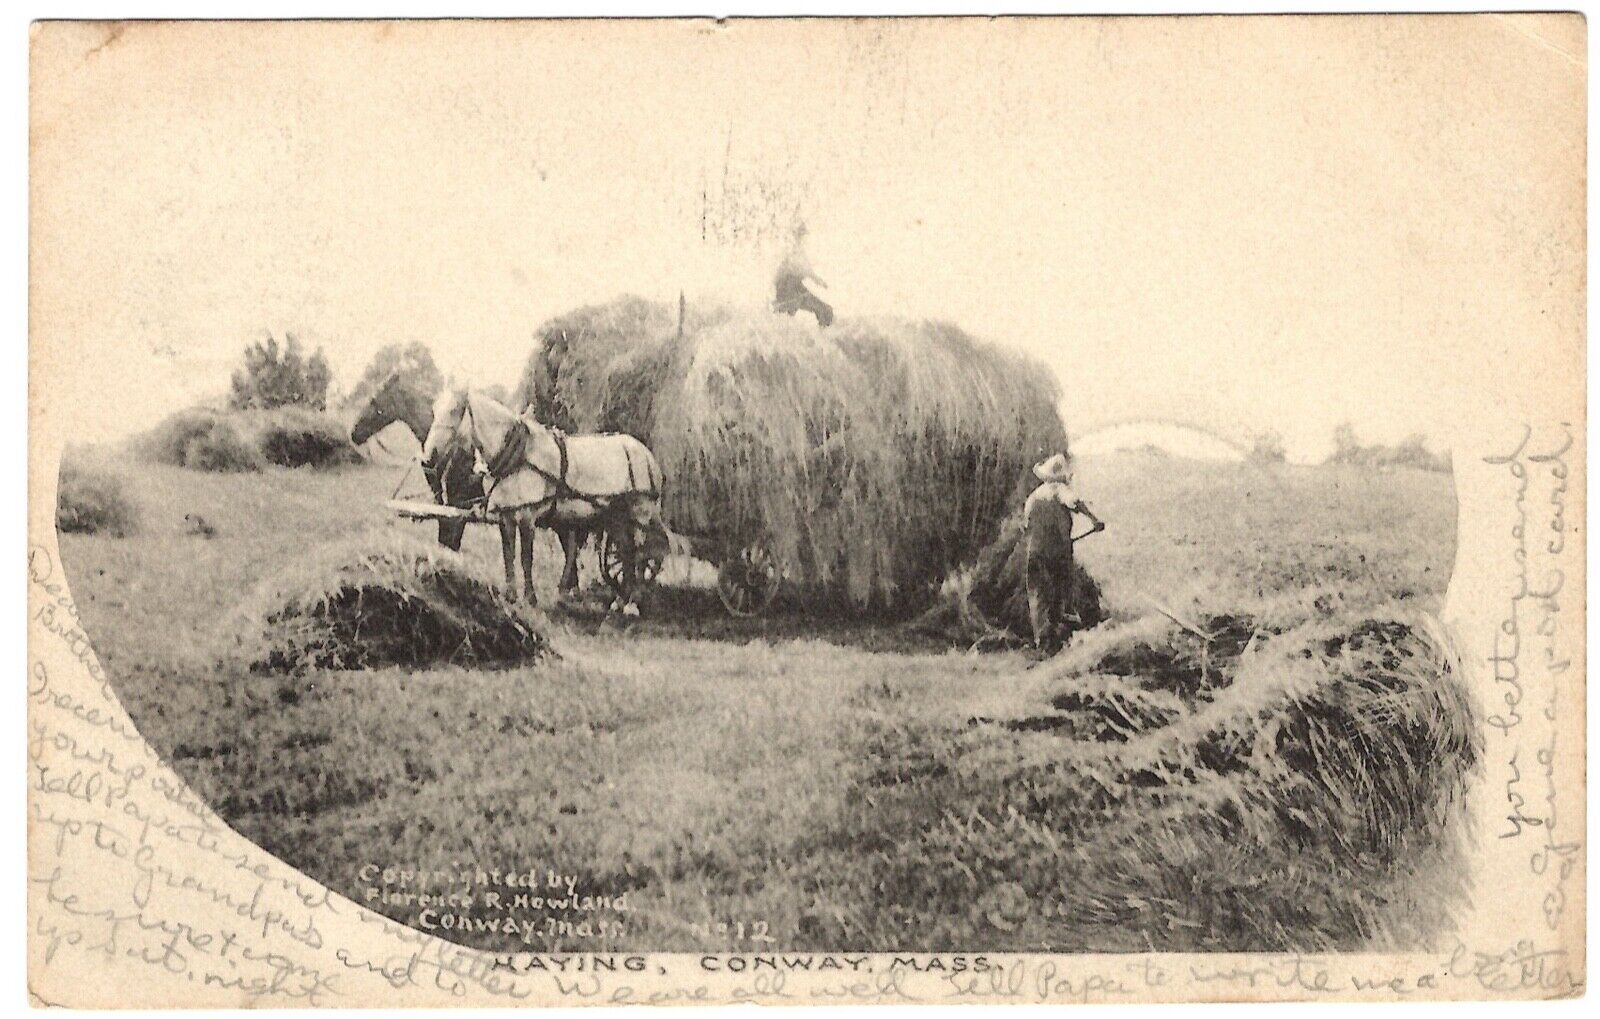 1906 CONWAY MA Photo Postcard Hay Harvest Time 2 Draft Horses pulling HAY WAGON